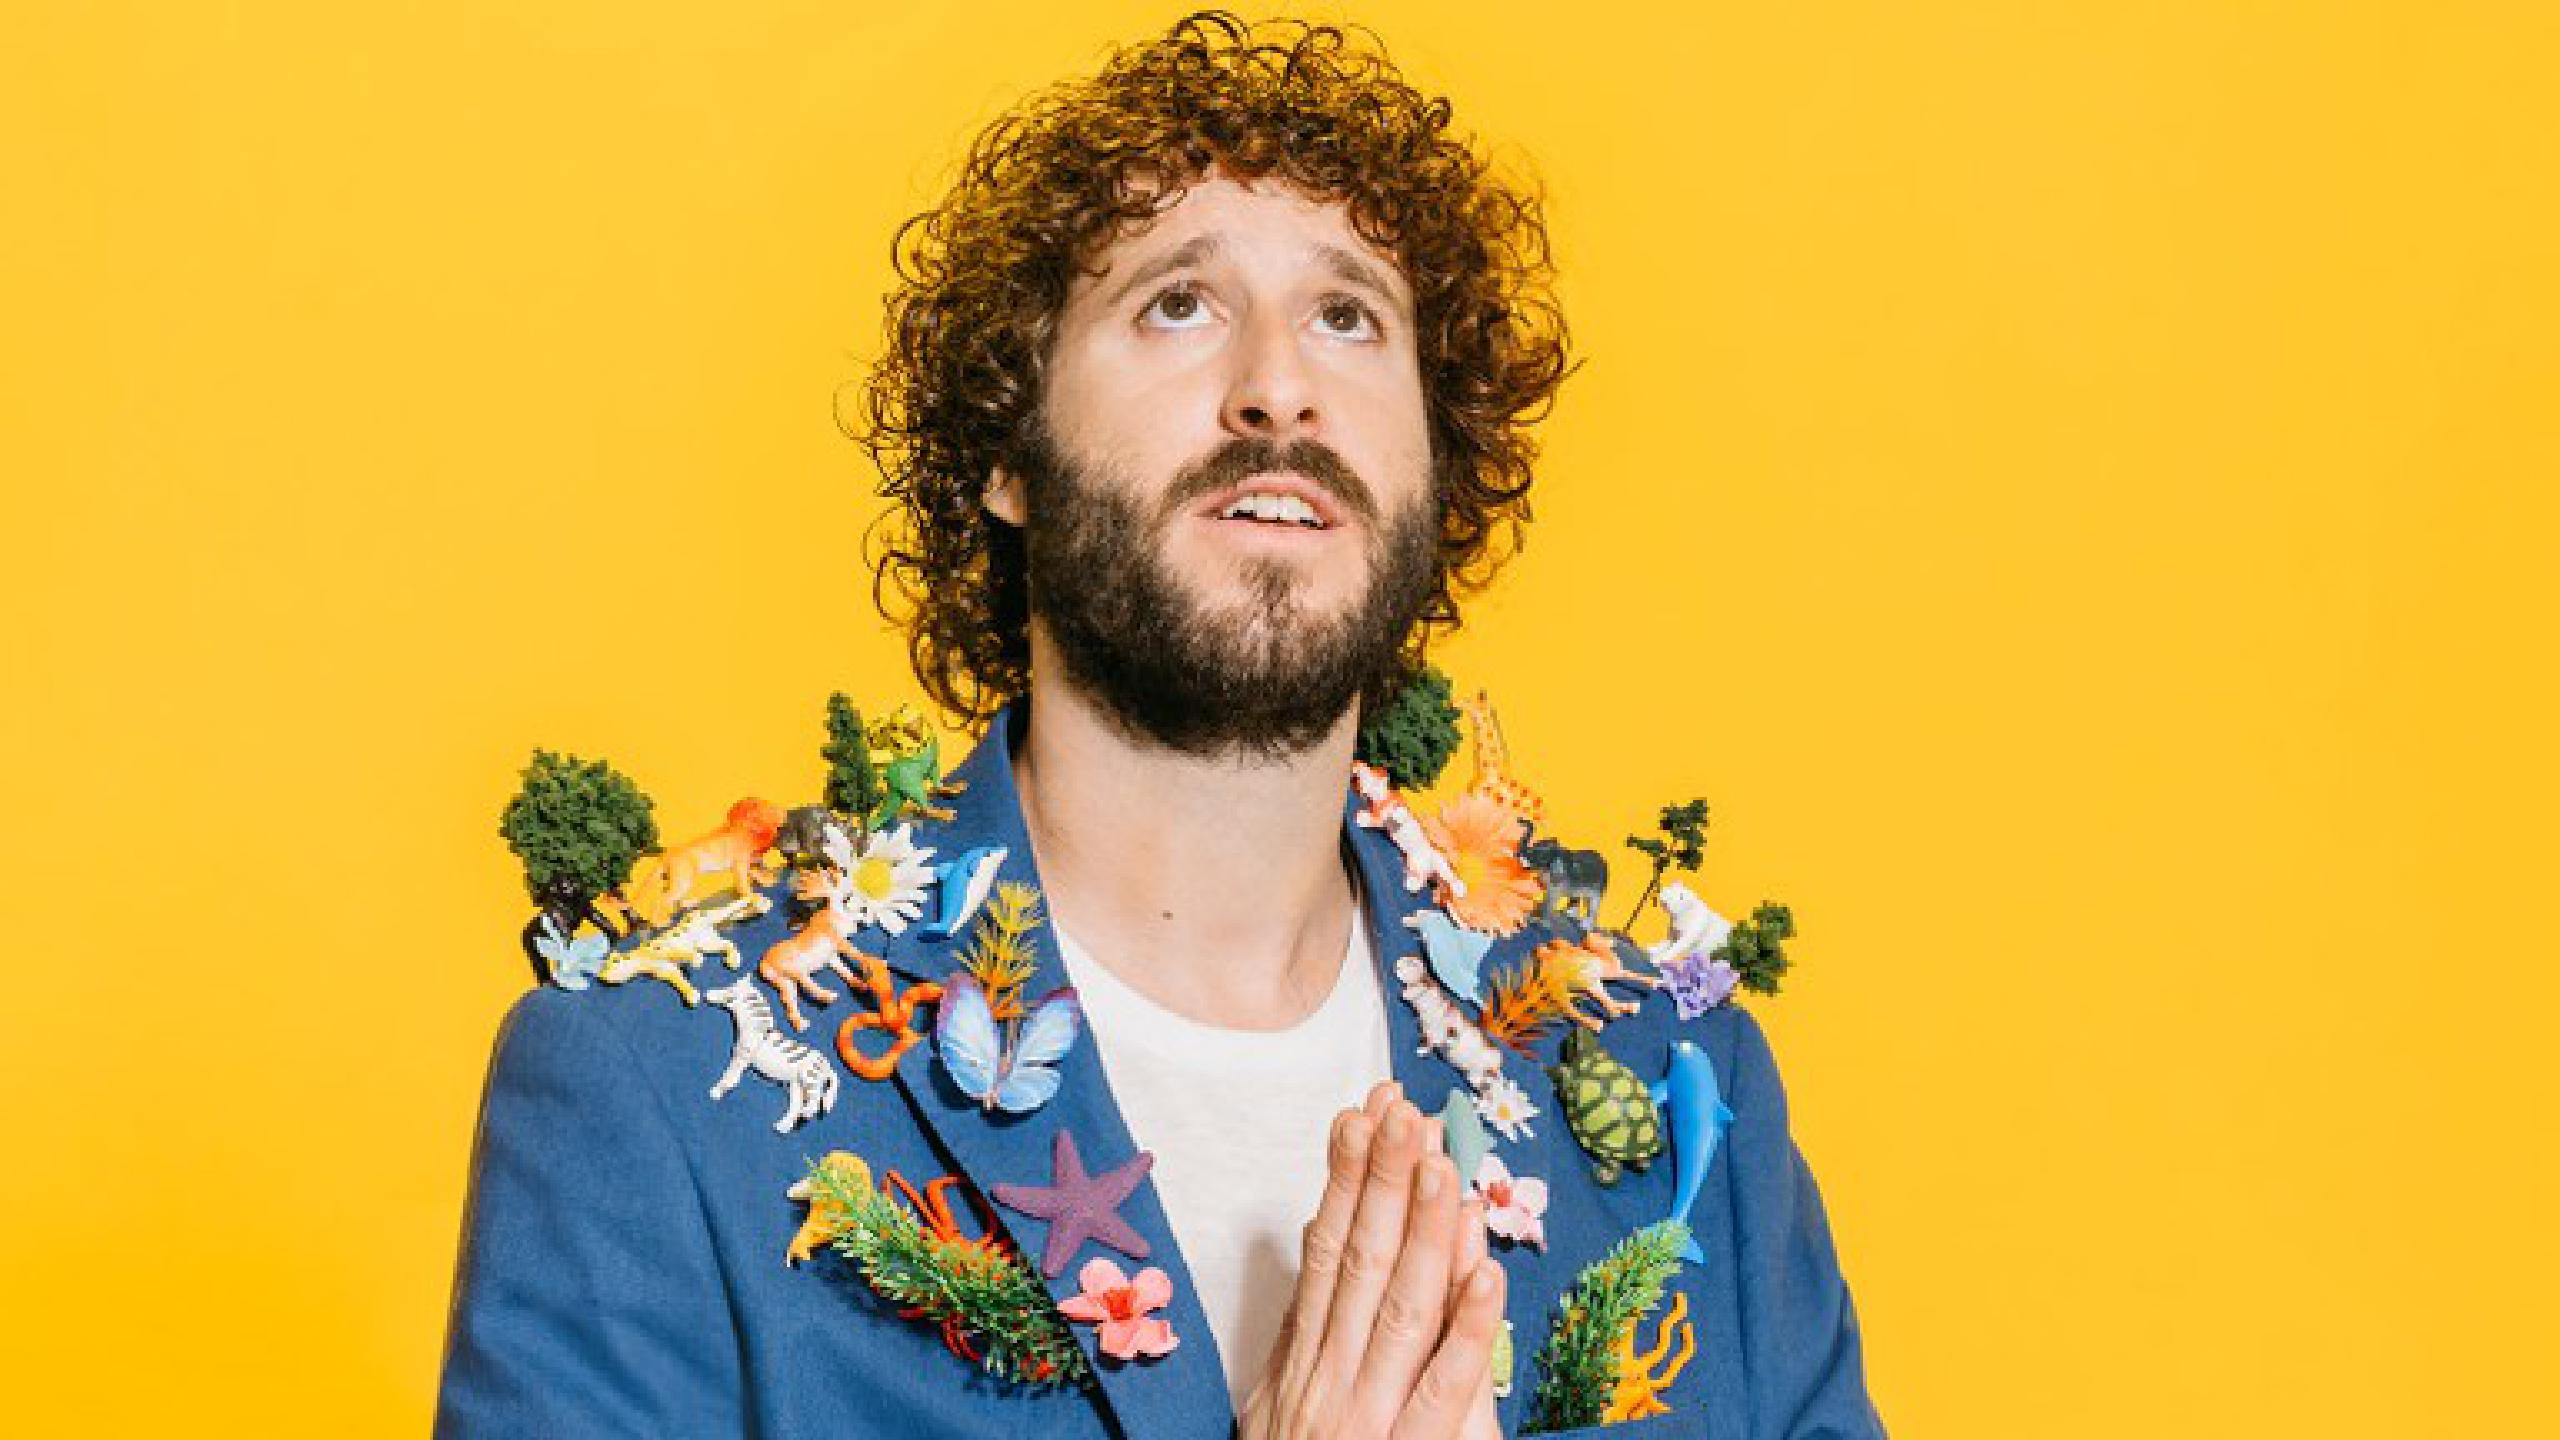 Lil Dicky tour dates 2022 2023. 